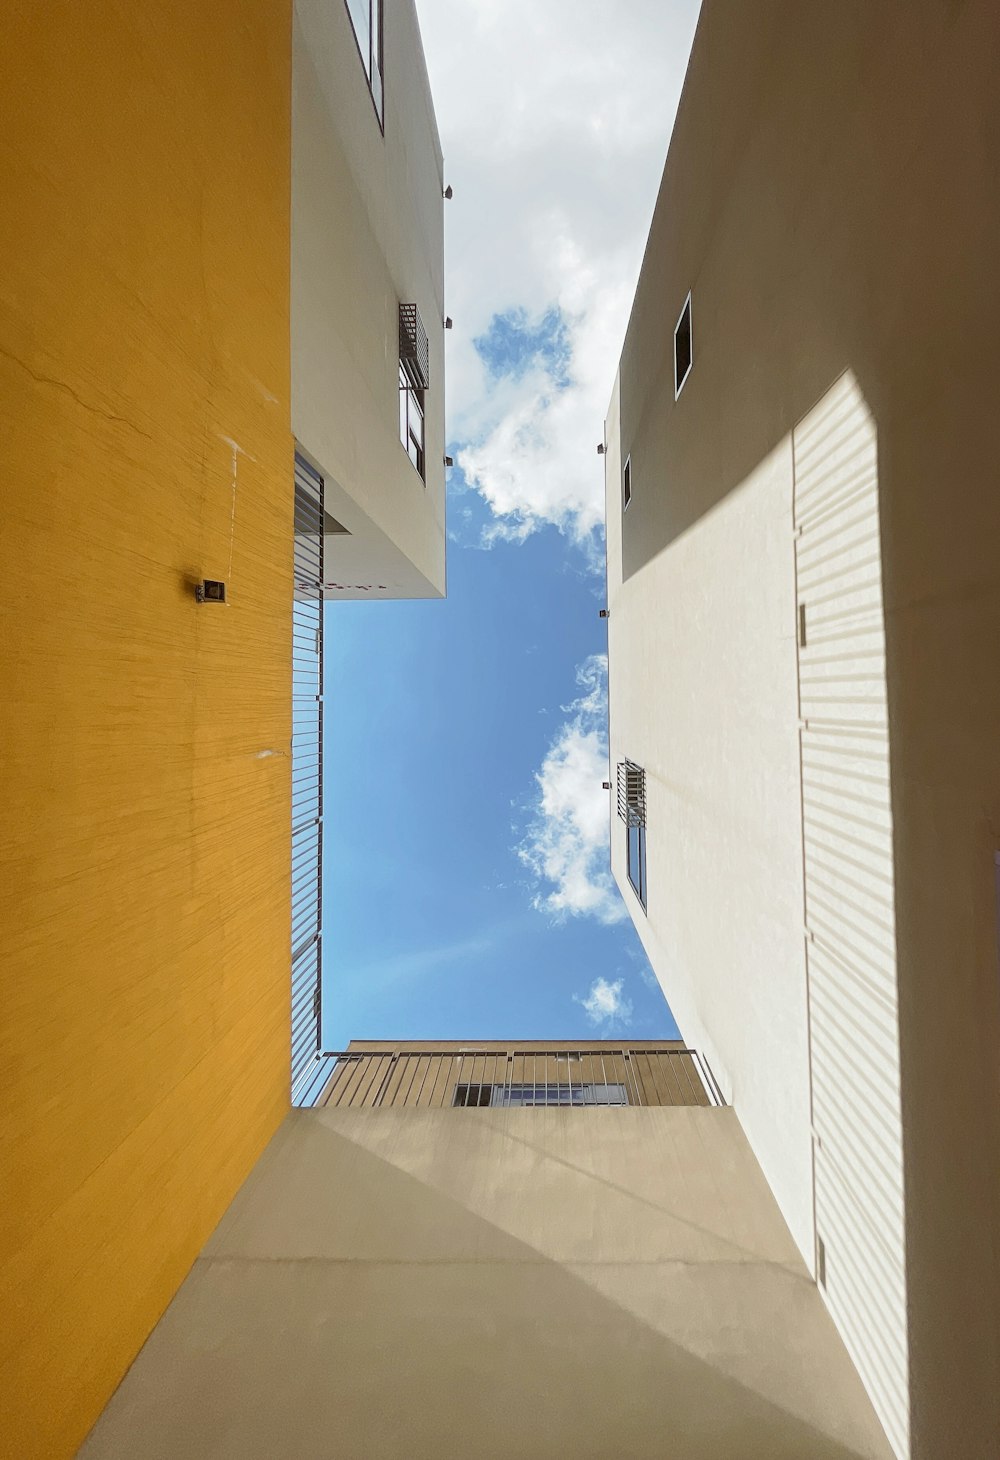 worms eye view of white concrete building under blue and white sunny cloudy sky during